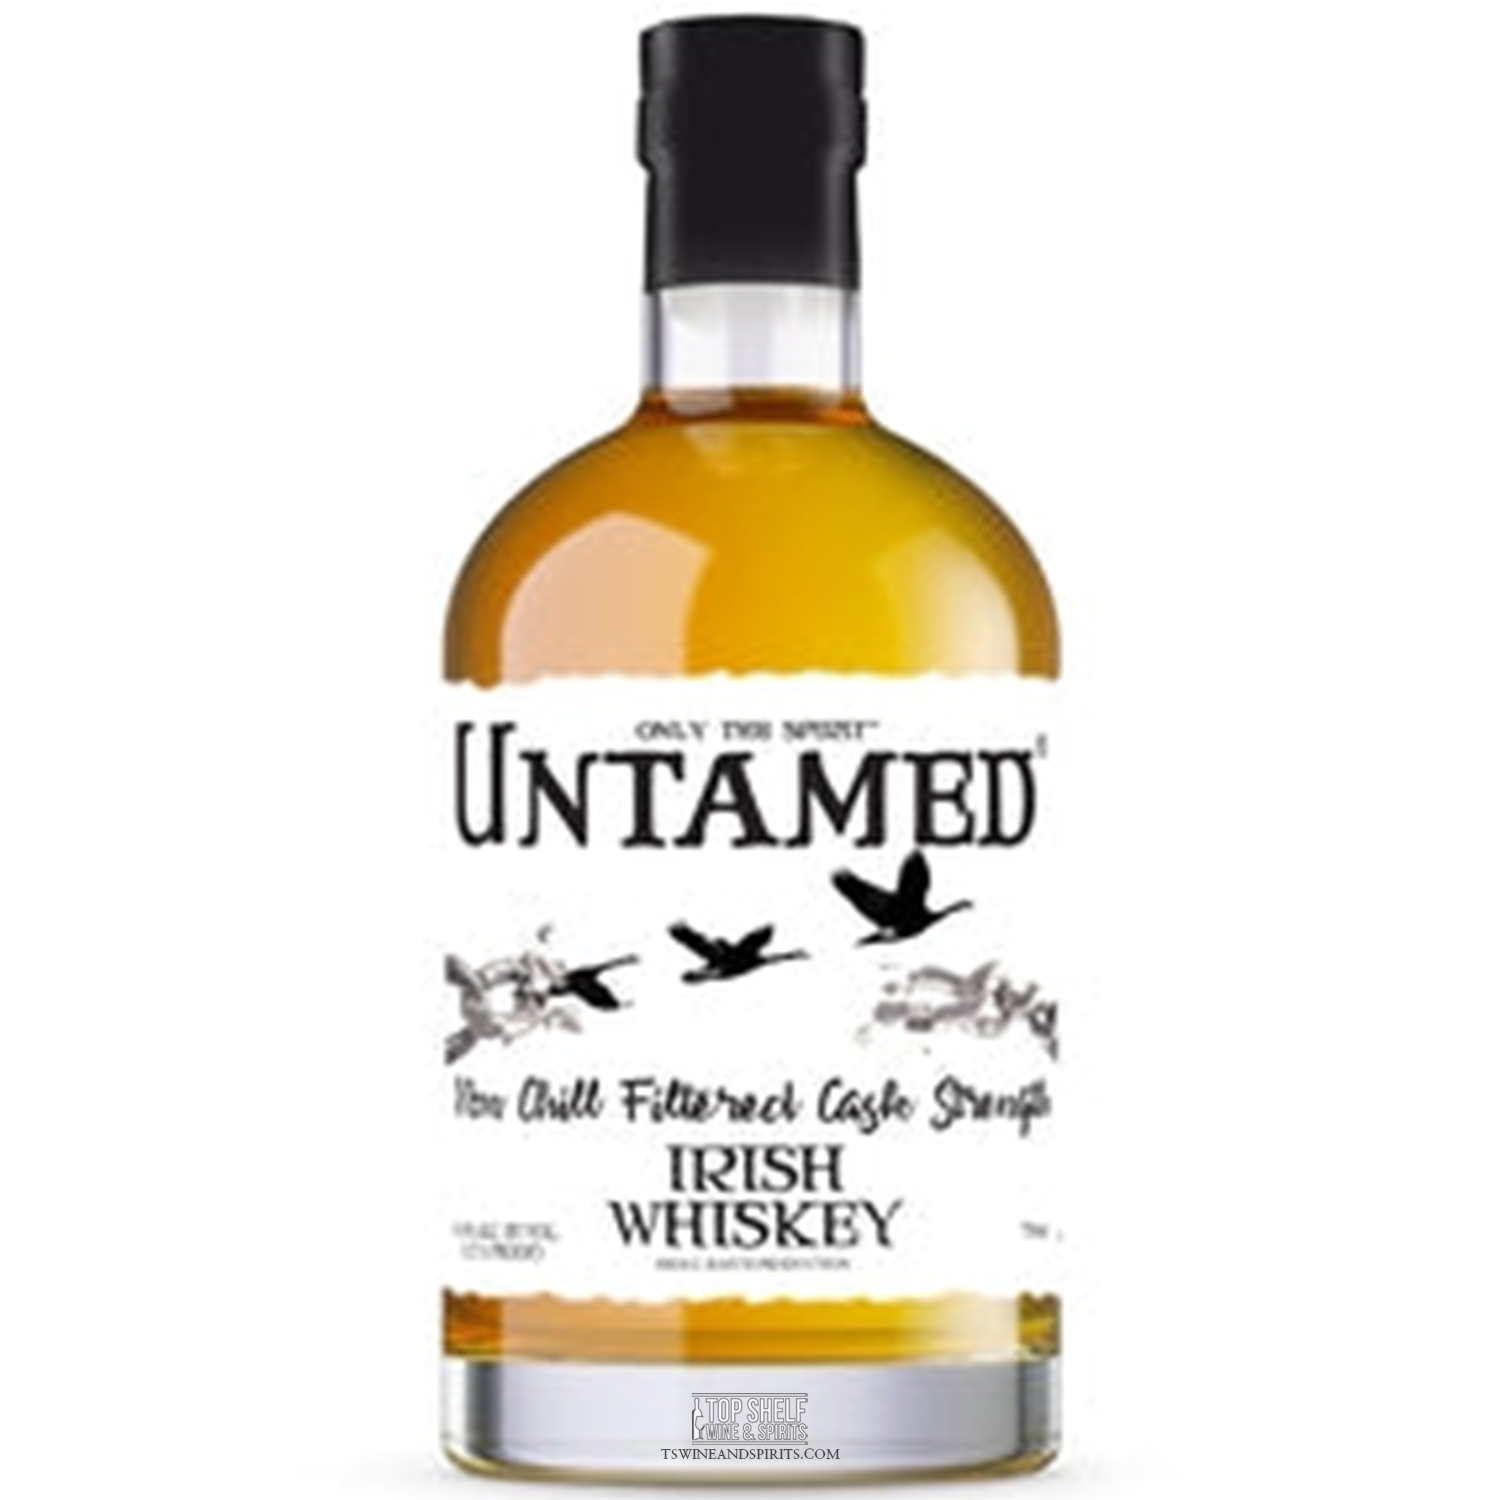 Untamed Non Chill Filtered Cask Strength Irish Whiskey (Proof 127.6)